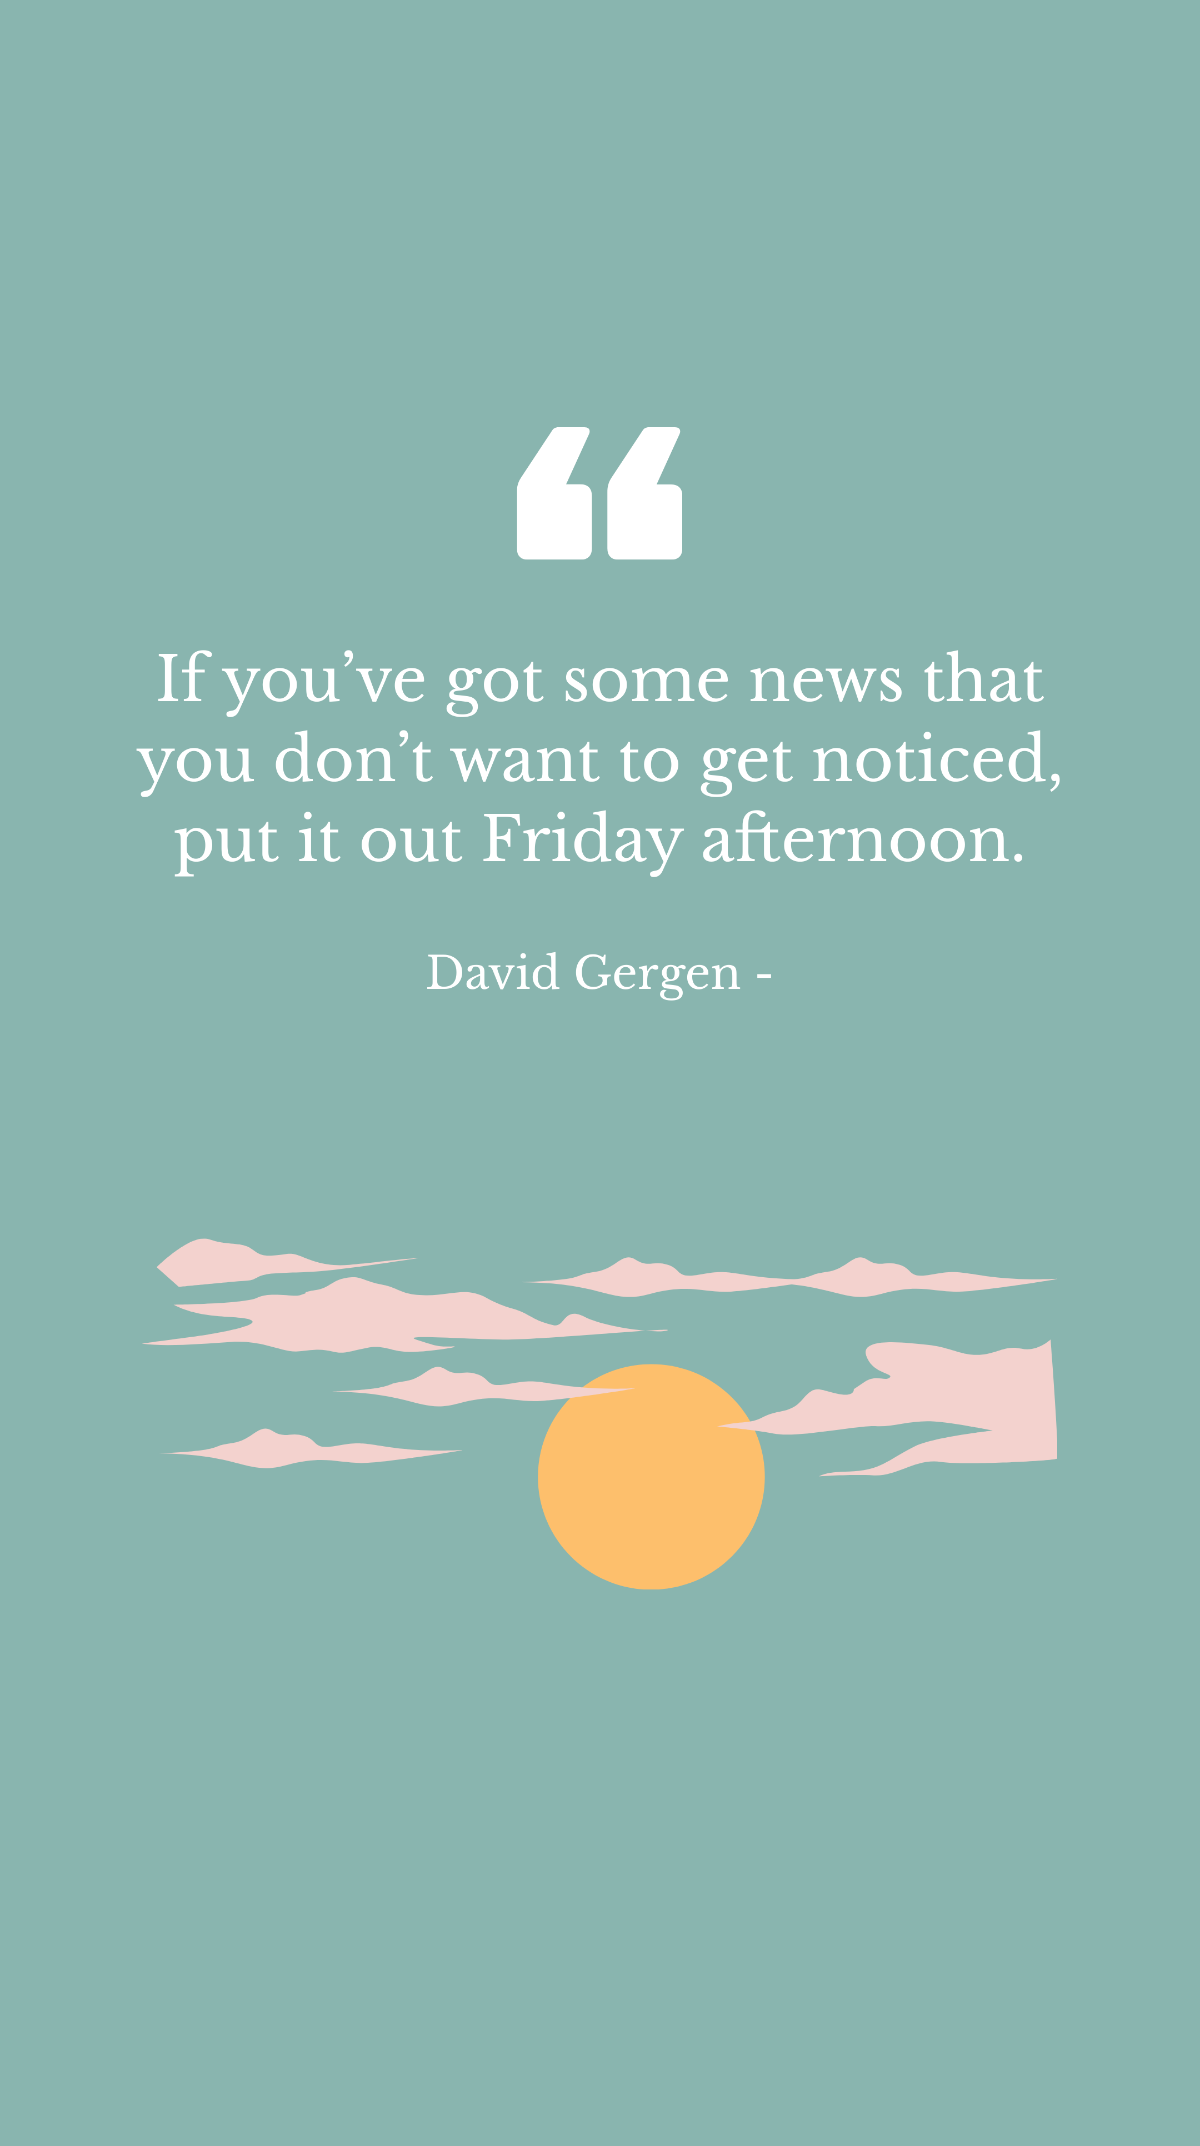 David Gergen - If you’ve got some news that you don’t want to get noticed, put it out Friday afternoon. Template